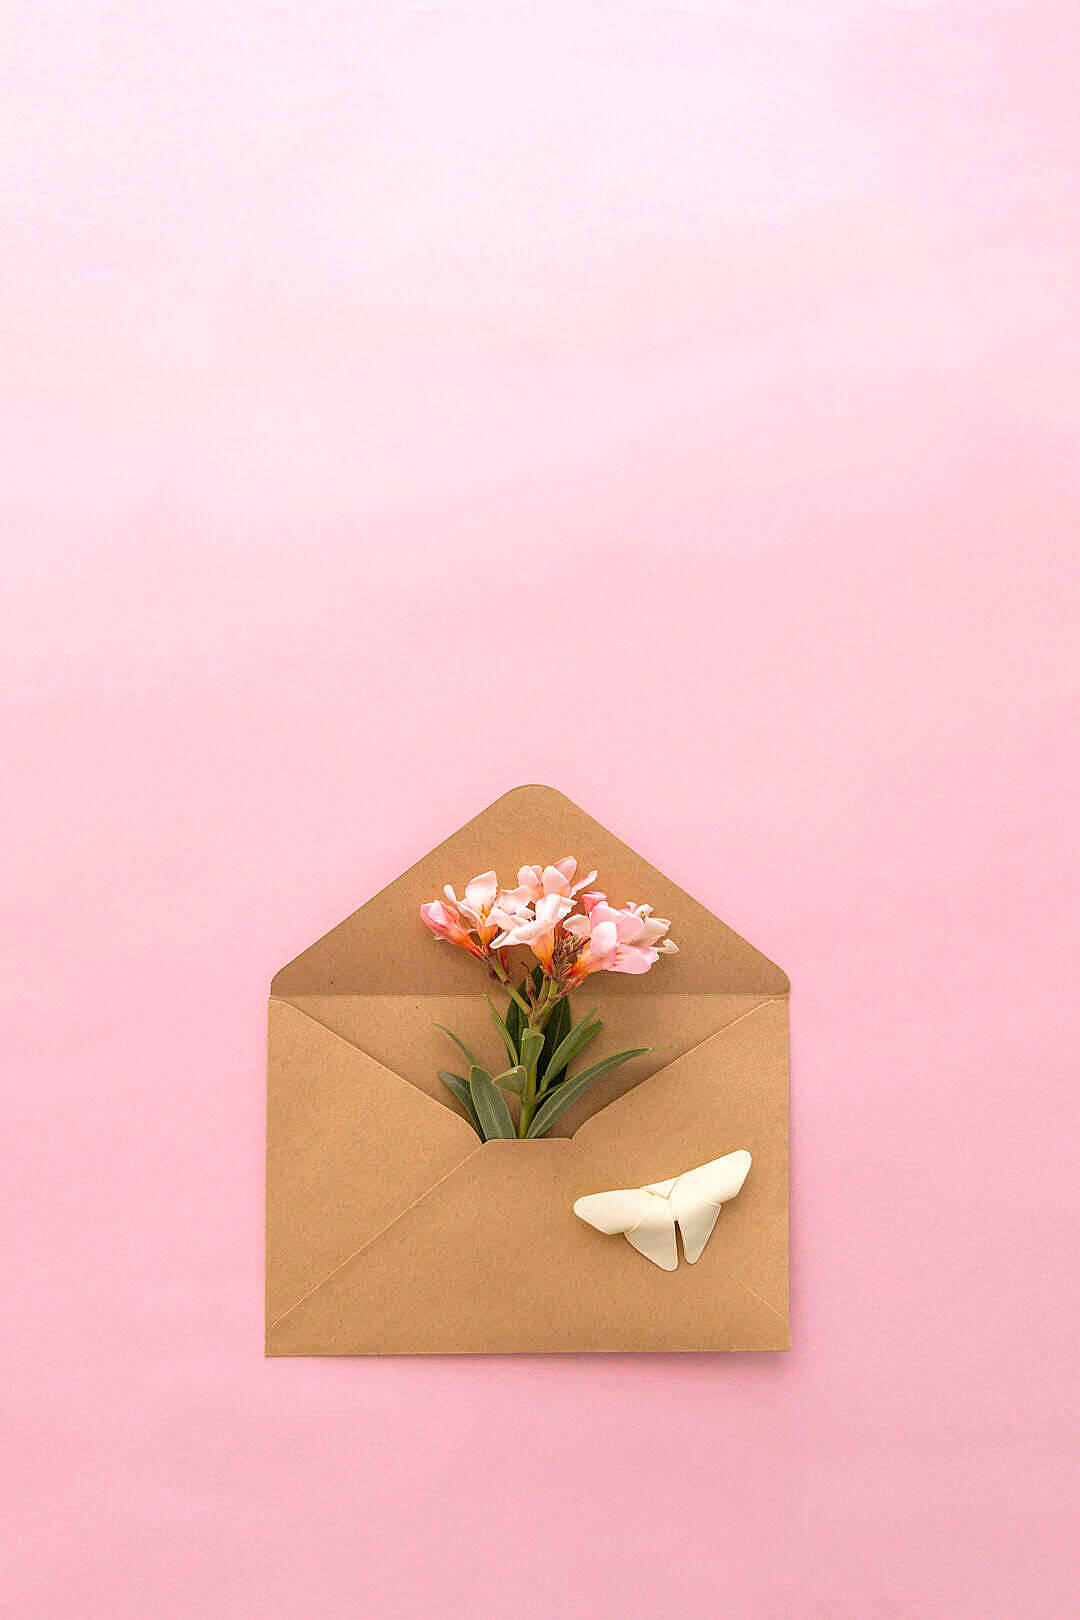 Natural Flower In An Envelope Background